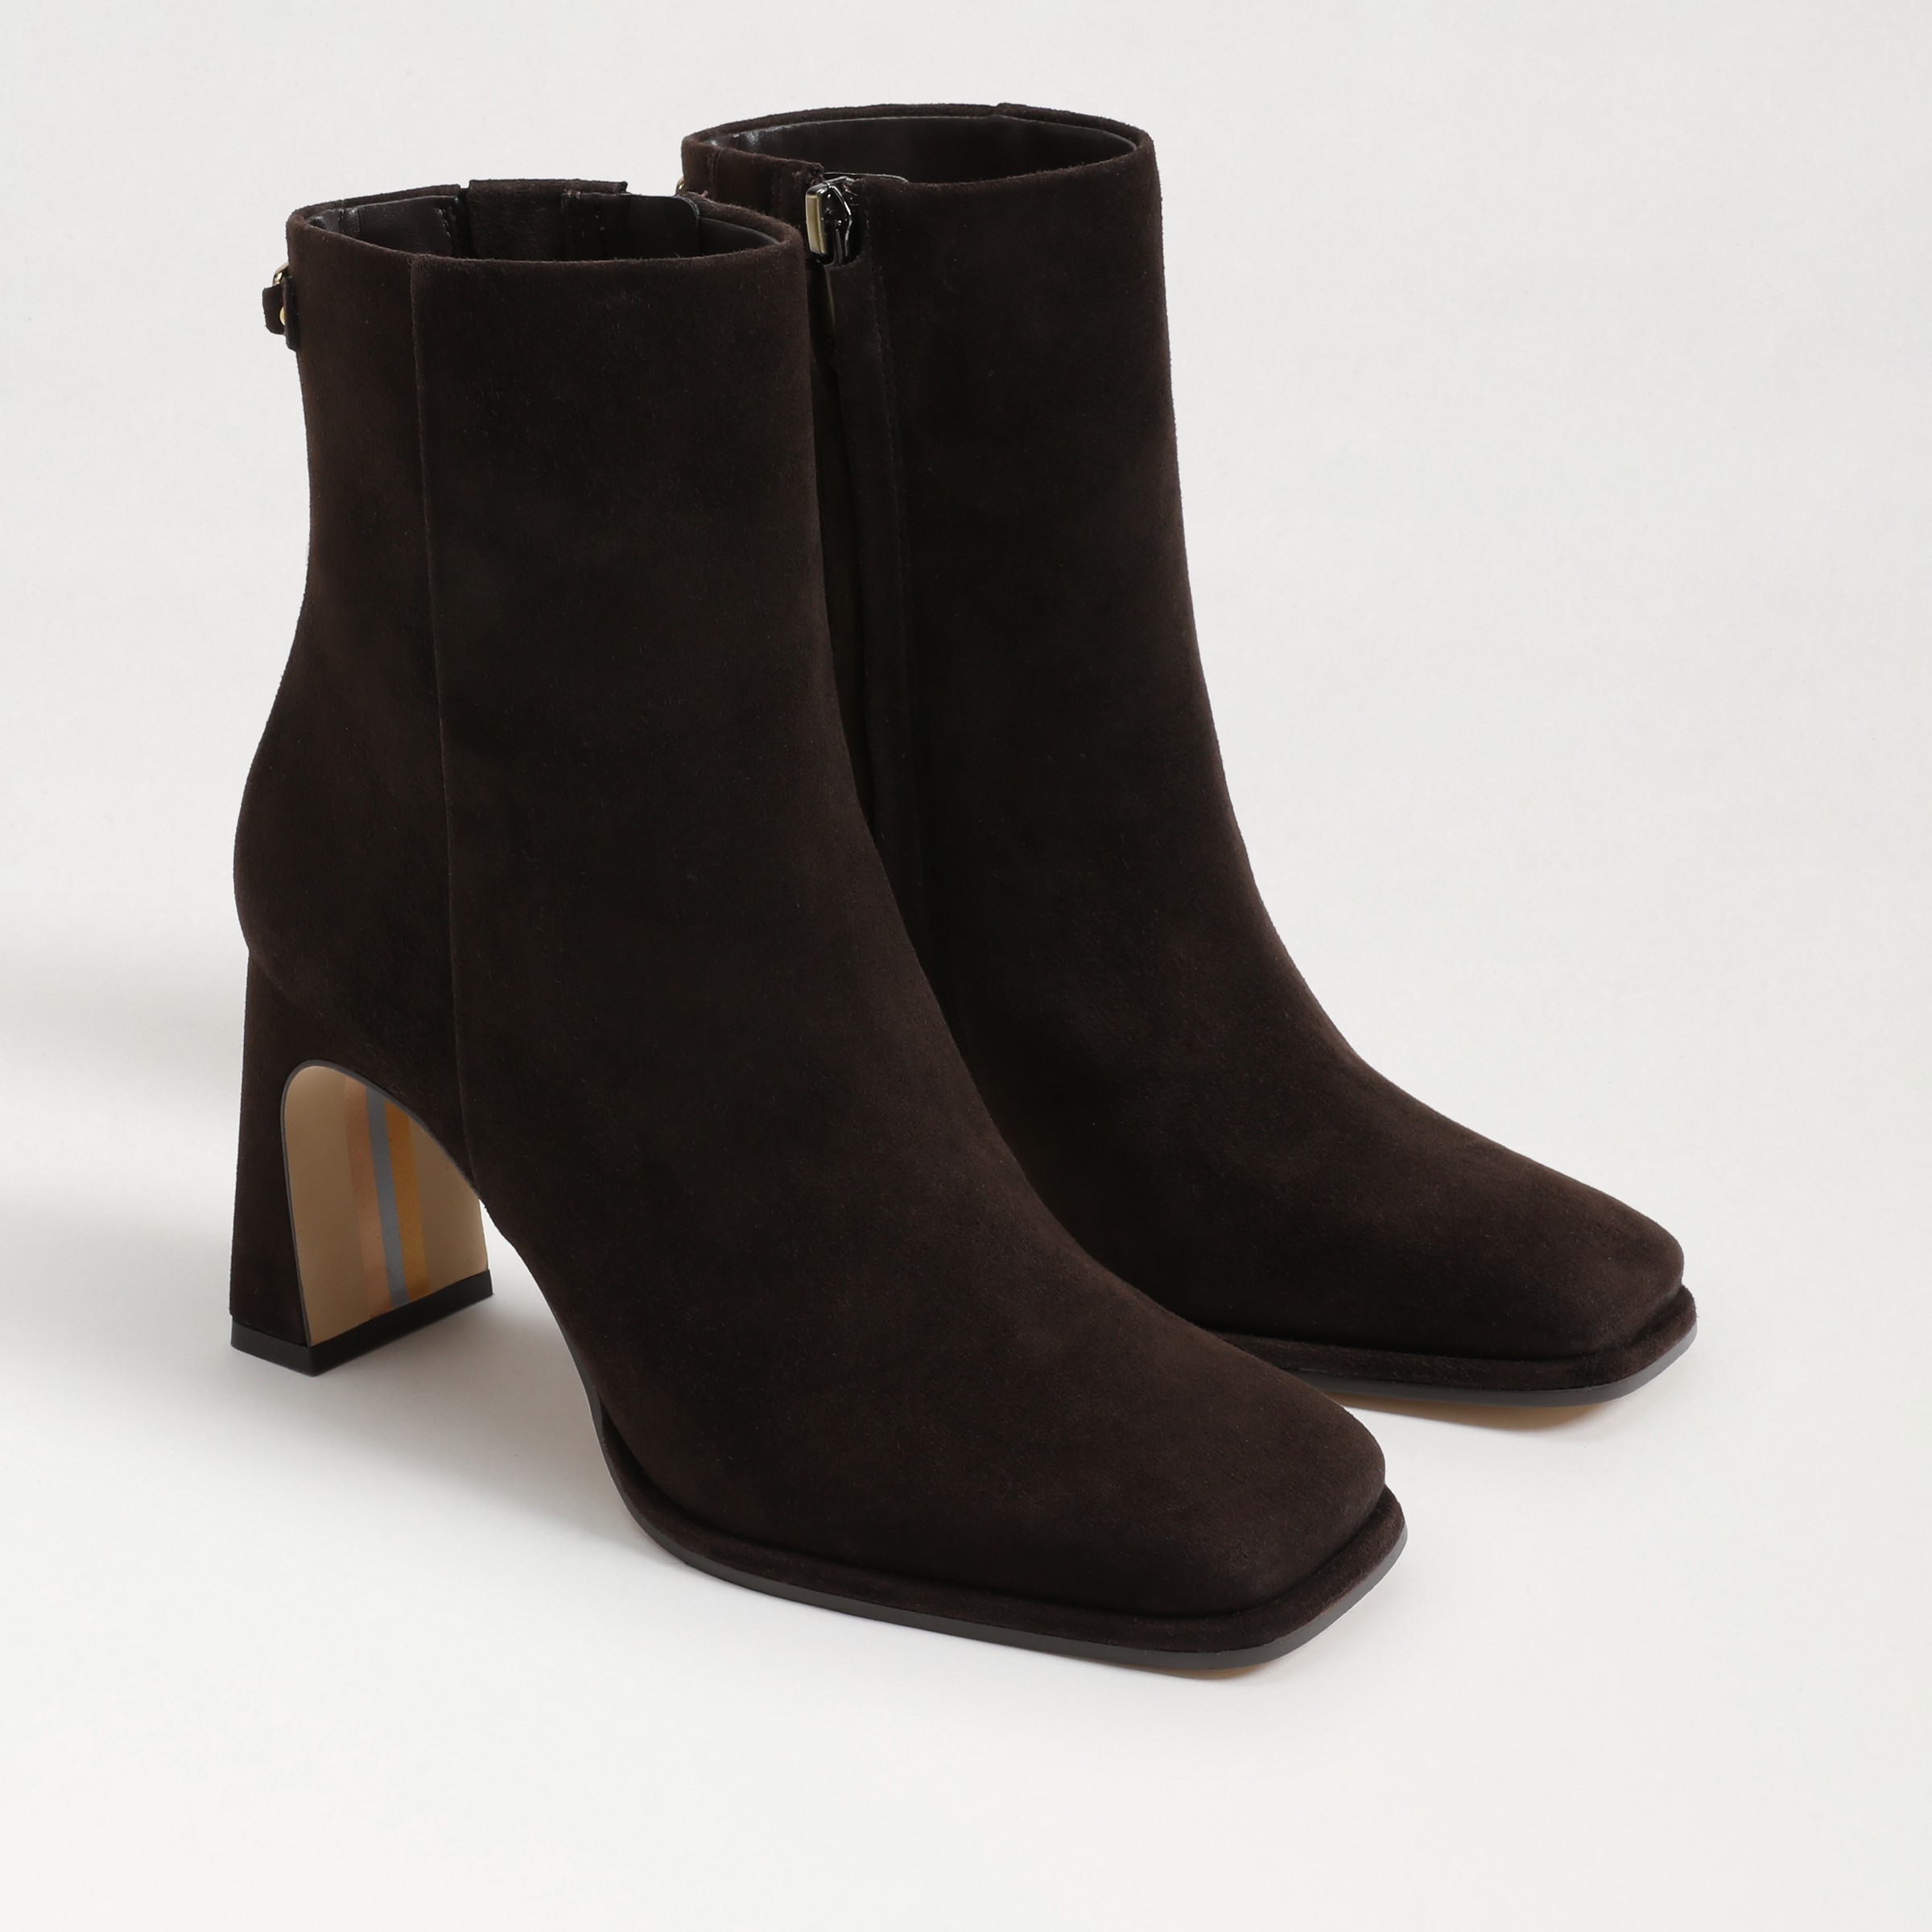 Shop Sam Edelman Irie Square Toe Ankle Bootie Chocolate Brown Suede